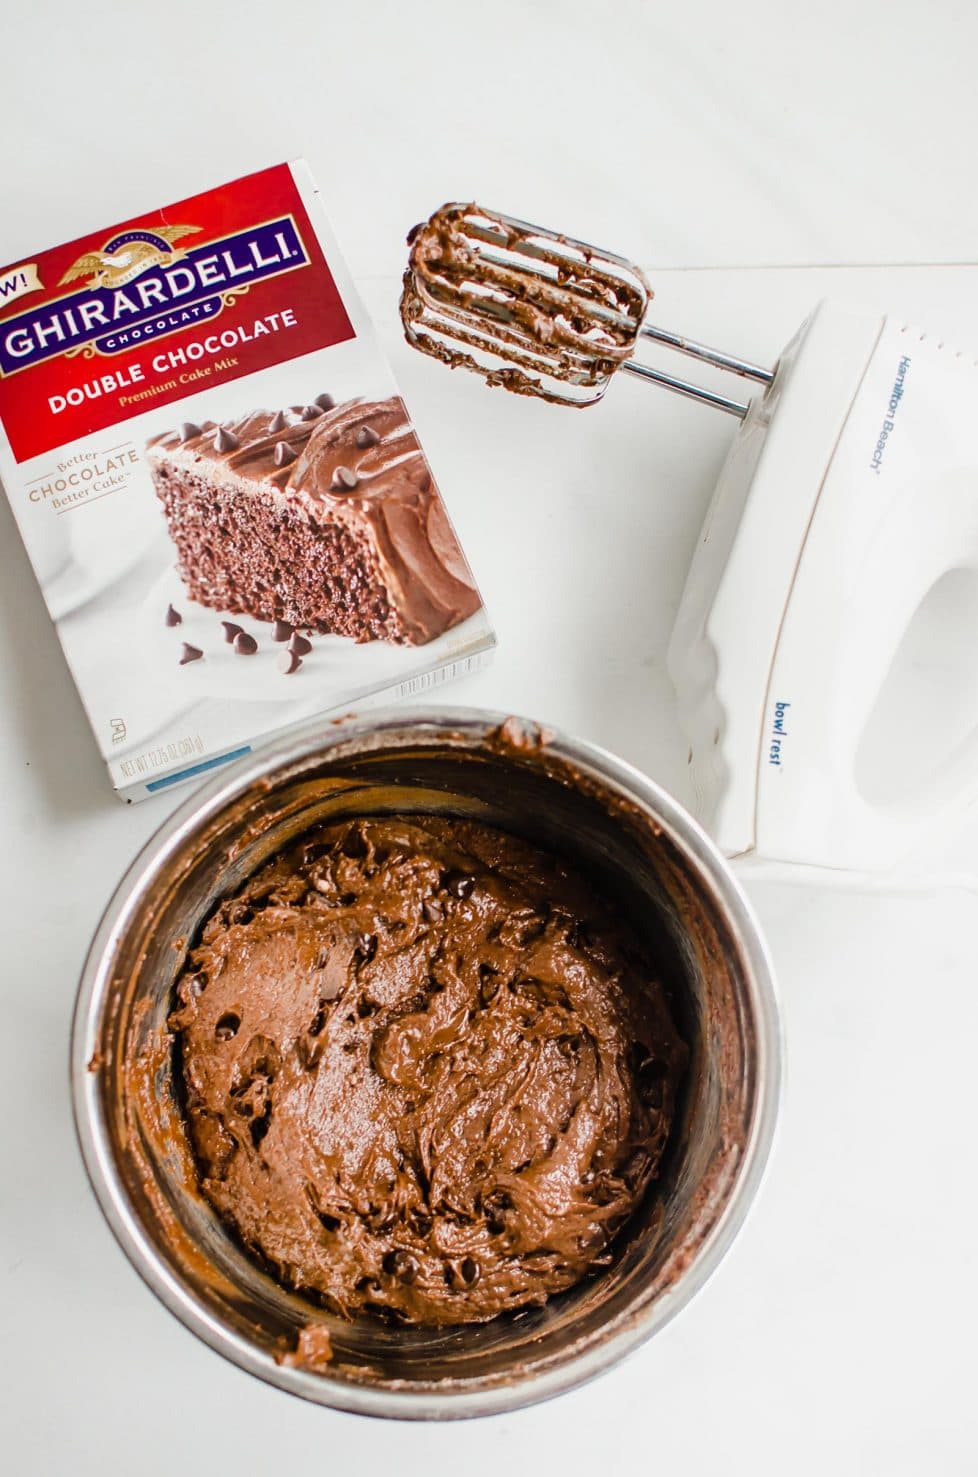 This recipe for Back Pocket Chocolate Fudge Cake is an easy bundt cake that is super moist, fudgy, and extra delicious. It's made with Ghirardelli chocolate, sour cream, and topped with hot fudge and caramel! #valentines #chocolatecake